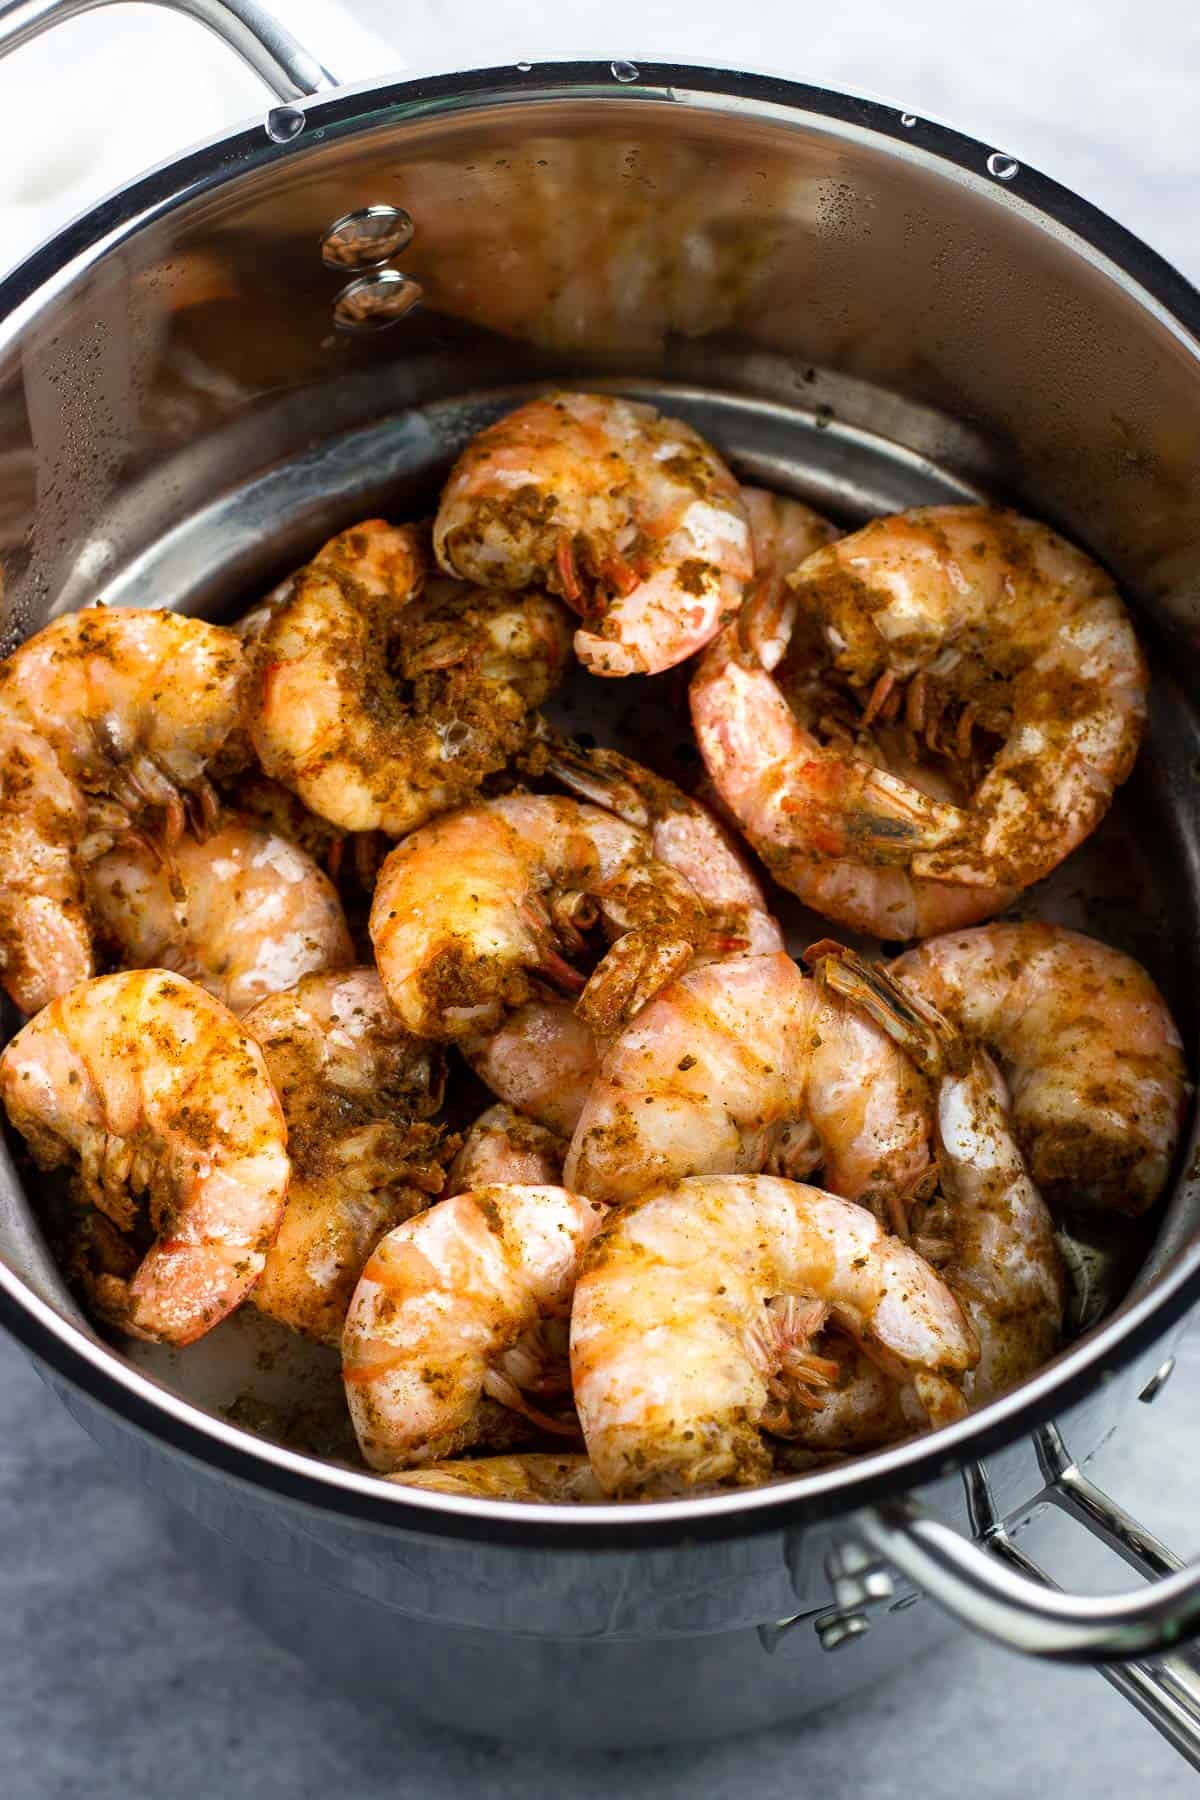 Extra-large steamed shrimp in a stainless steel steamer pot.